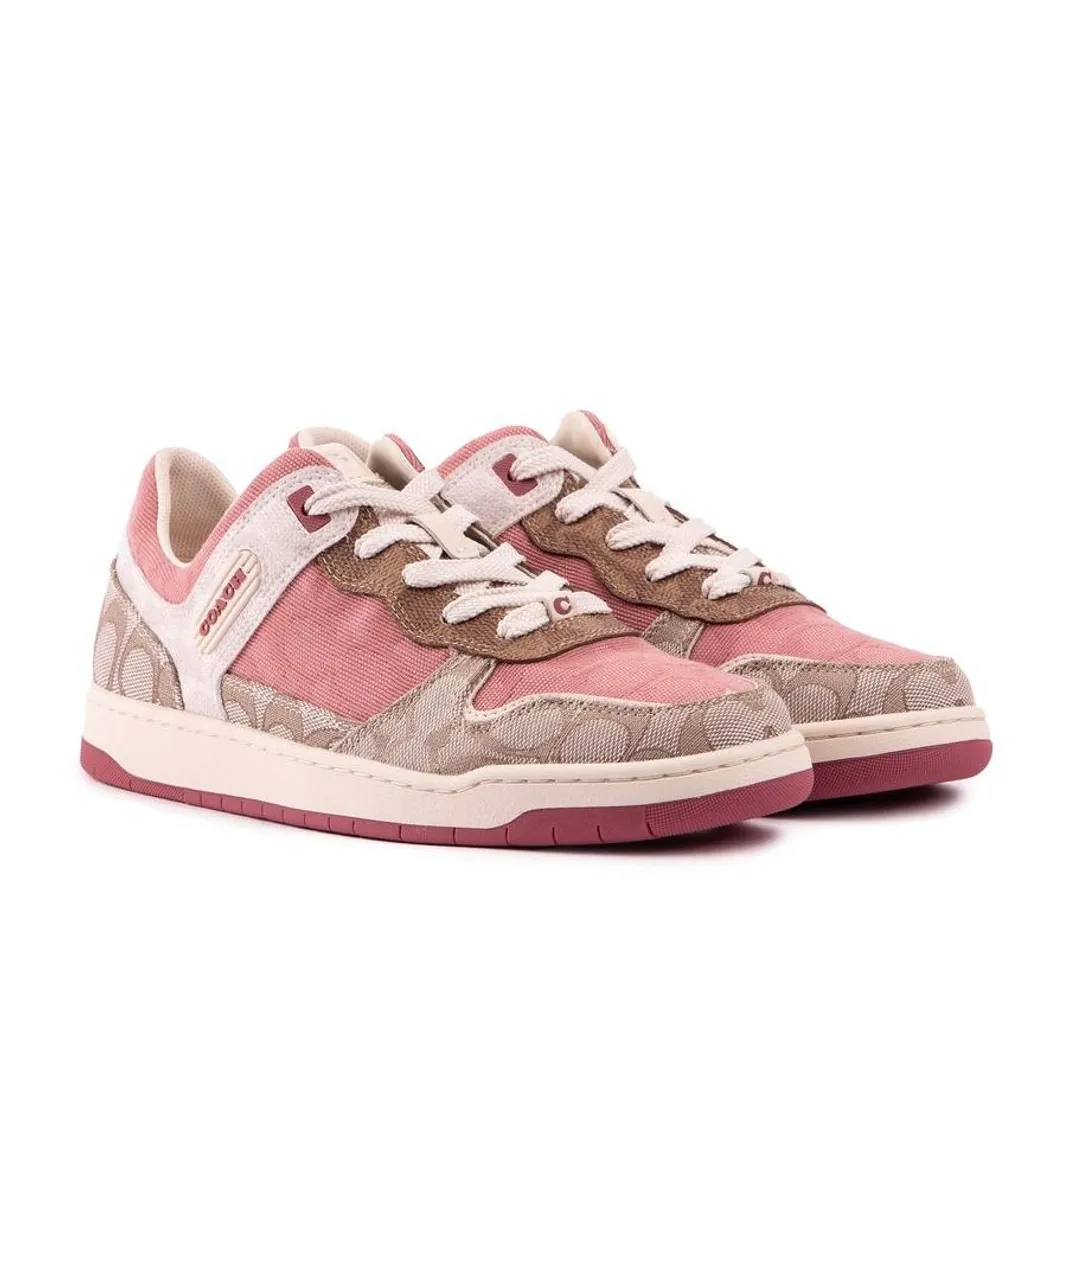 Coach Womens Multi Signature Trainers - Pink